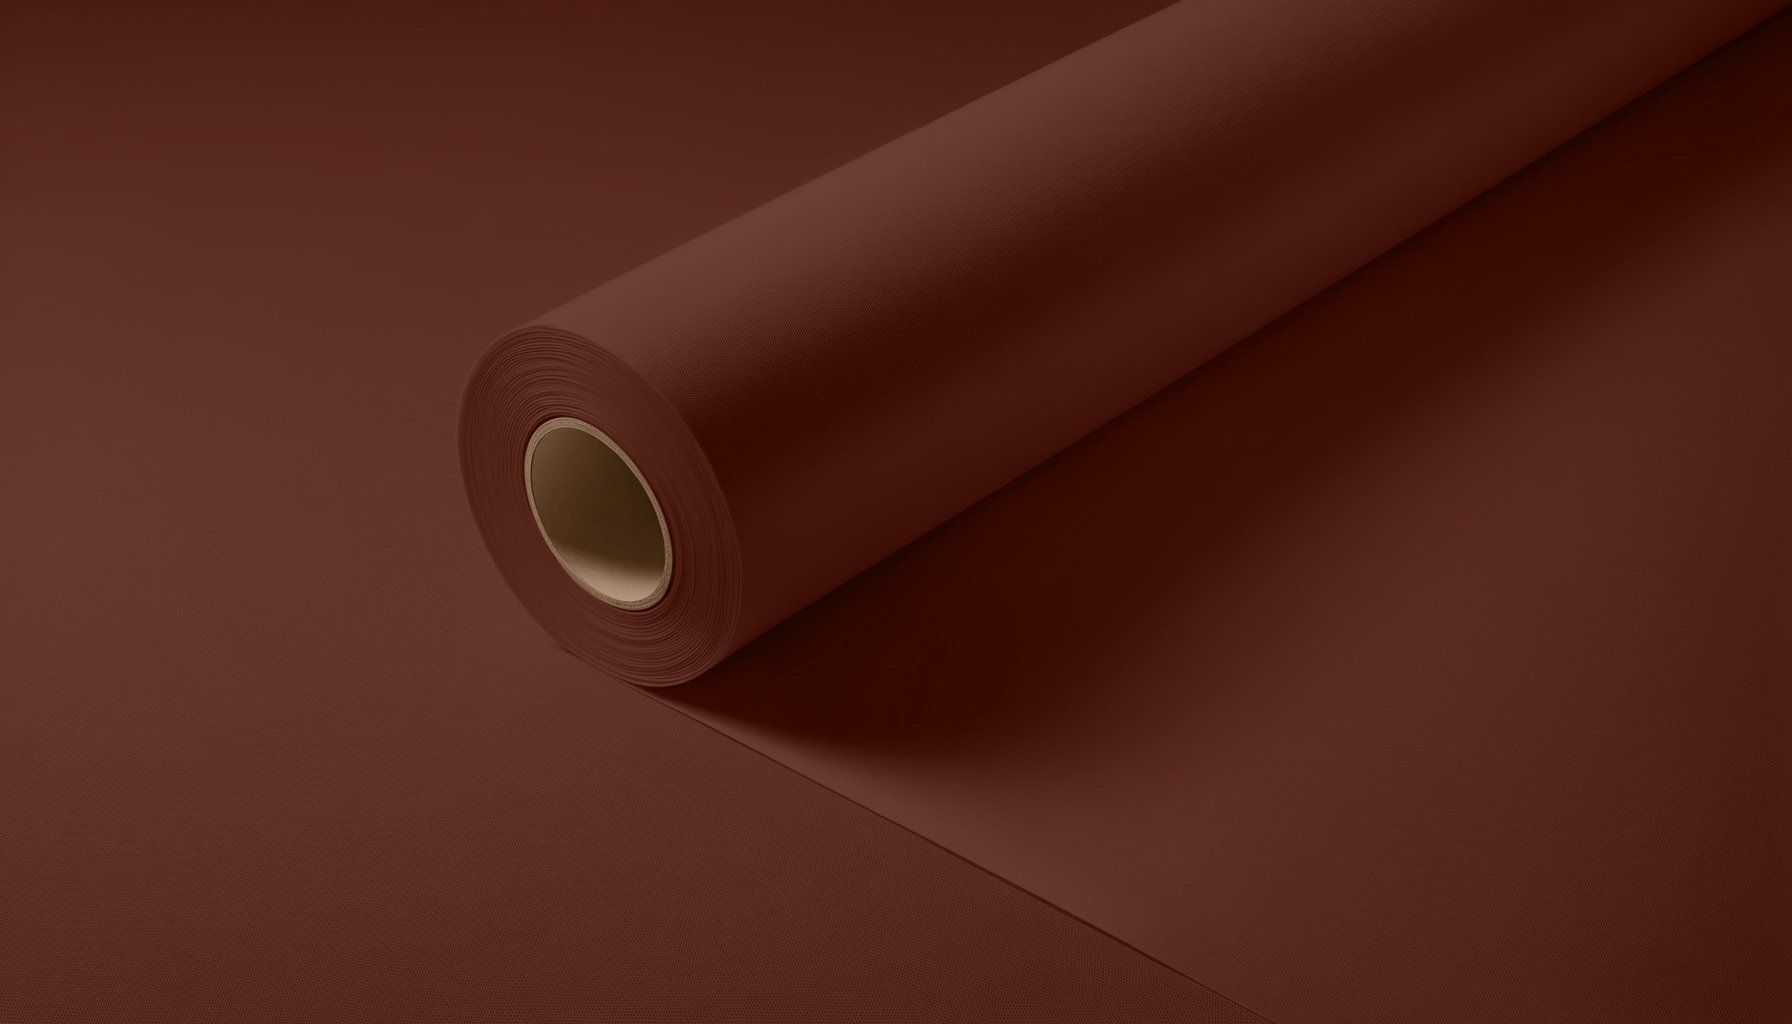 Peel & Stick Removable Re-usable Paint - Color RAL 8015 Chestnut Brown - offRAL™ - RALRAW LLC, USA